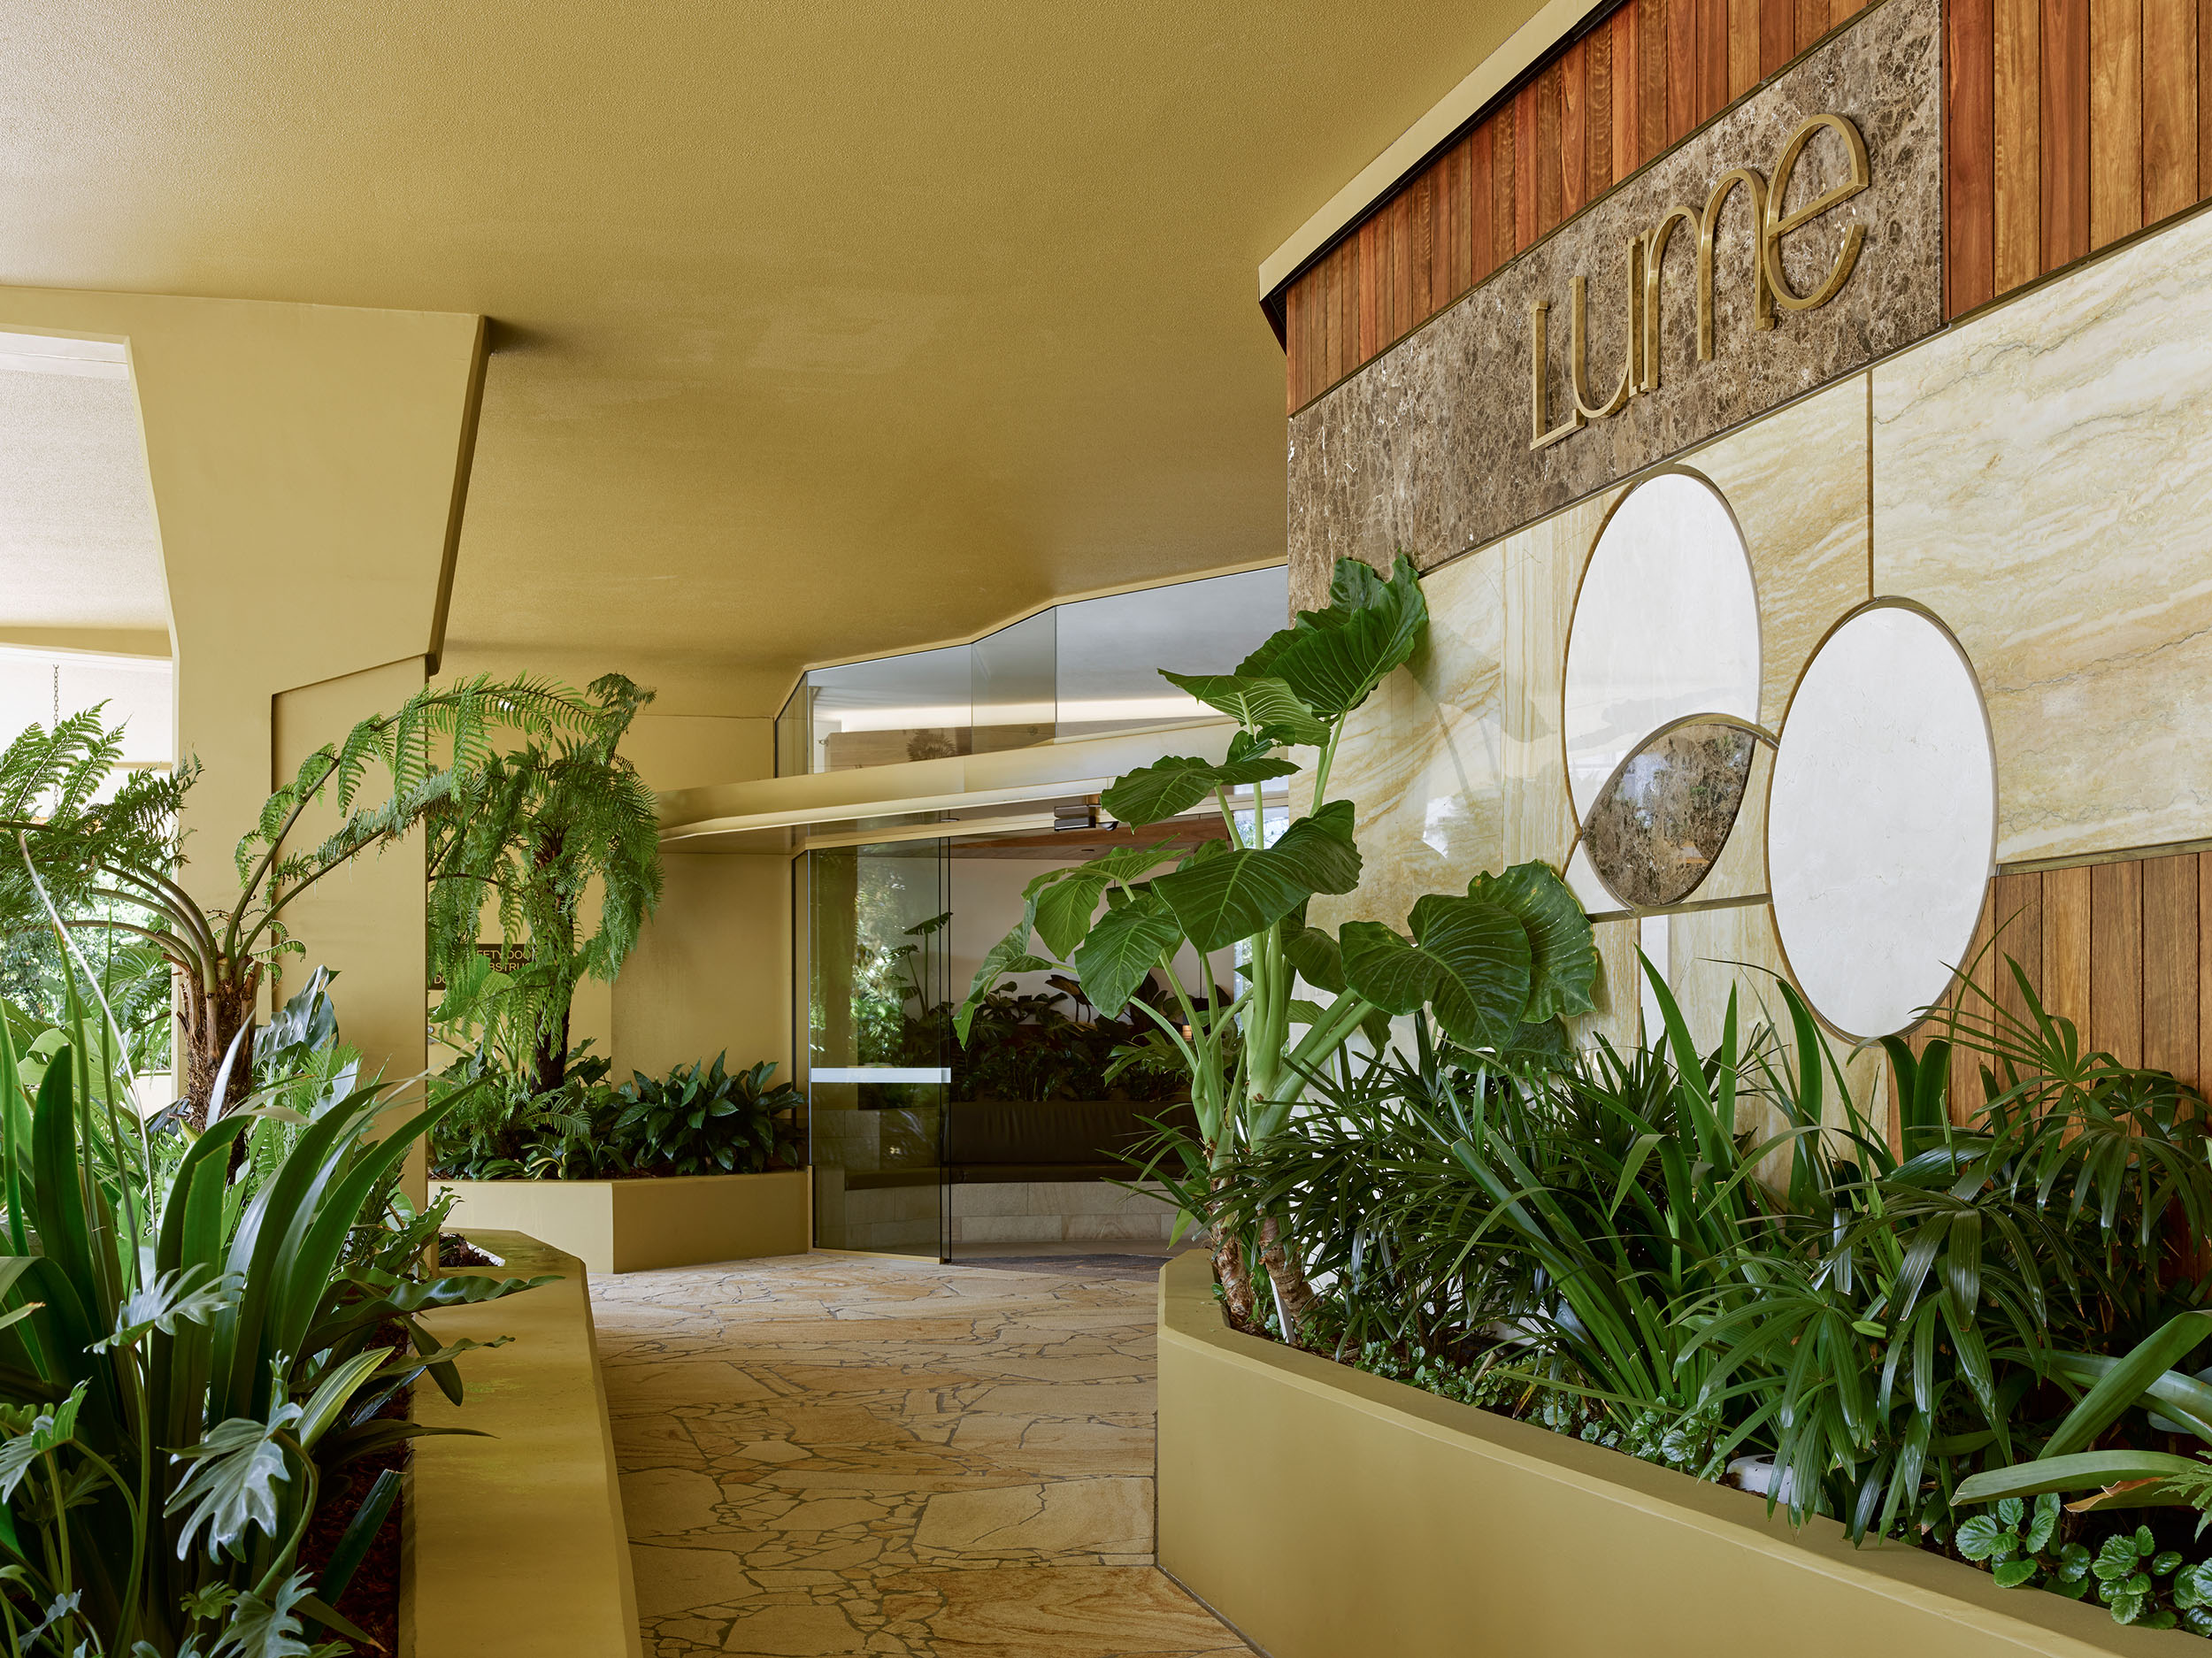 Entrance to a high-class apartment building, offering a picturesque view through a pathway created by two large planters filled with lush tropical plants. The entrance features gold accents, timber finishes, and a natural stone floor, exuding a luxurious and inviting ambiance.